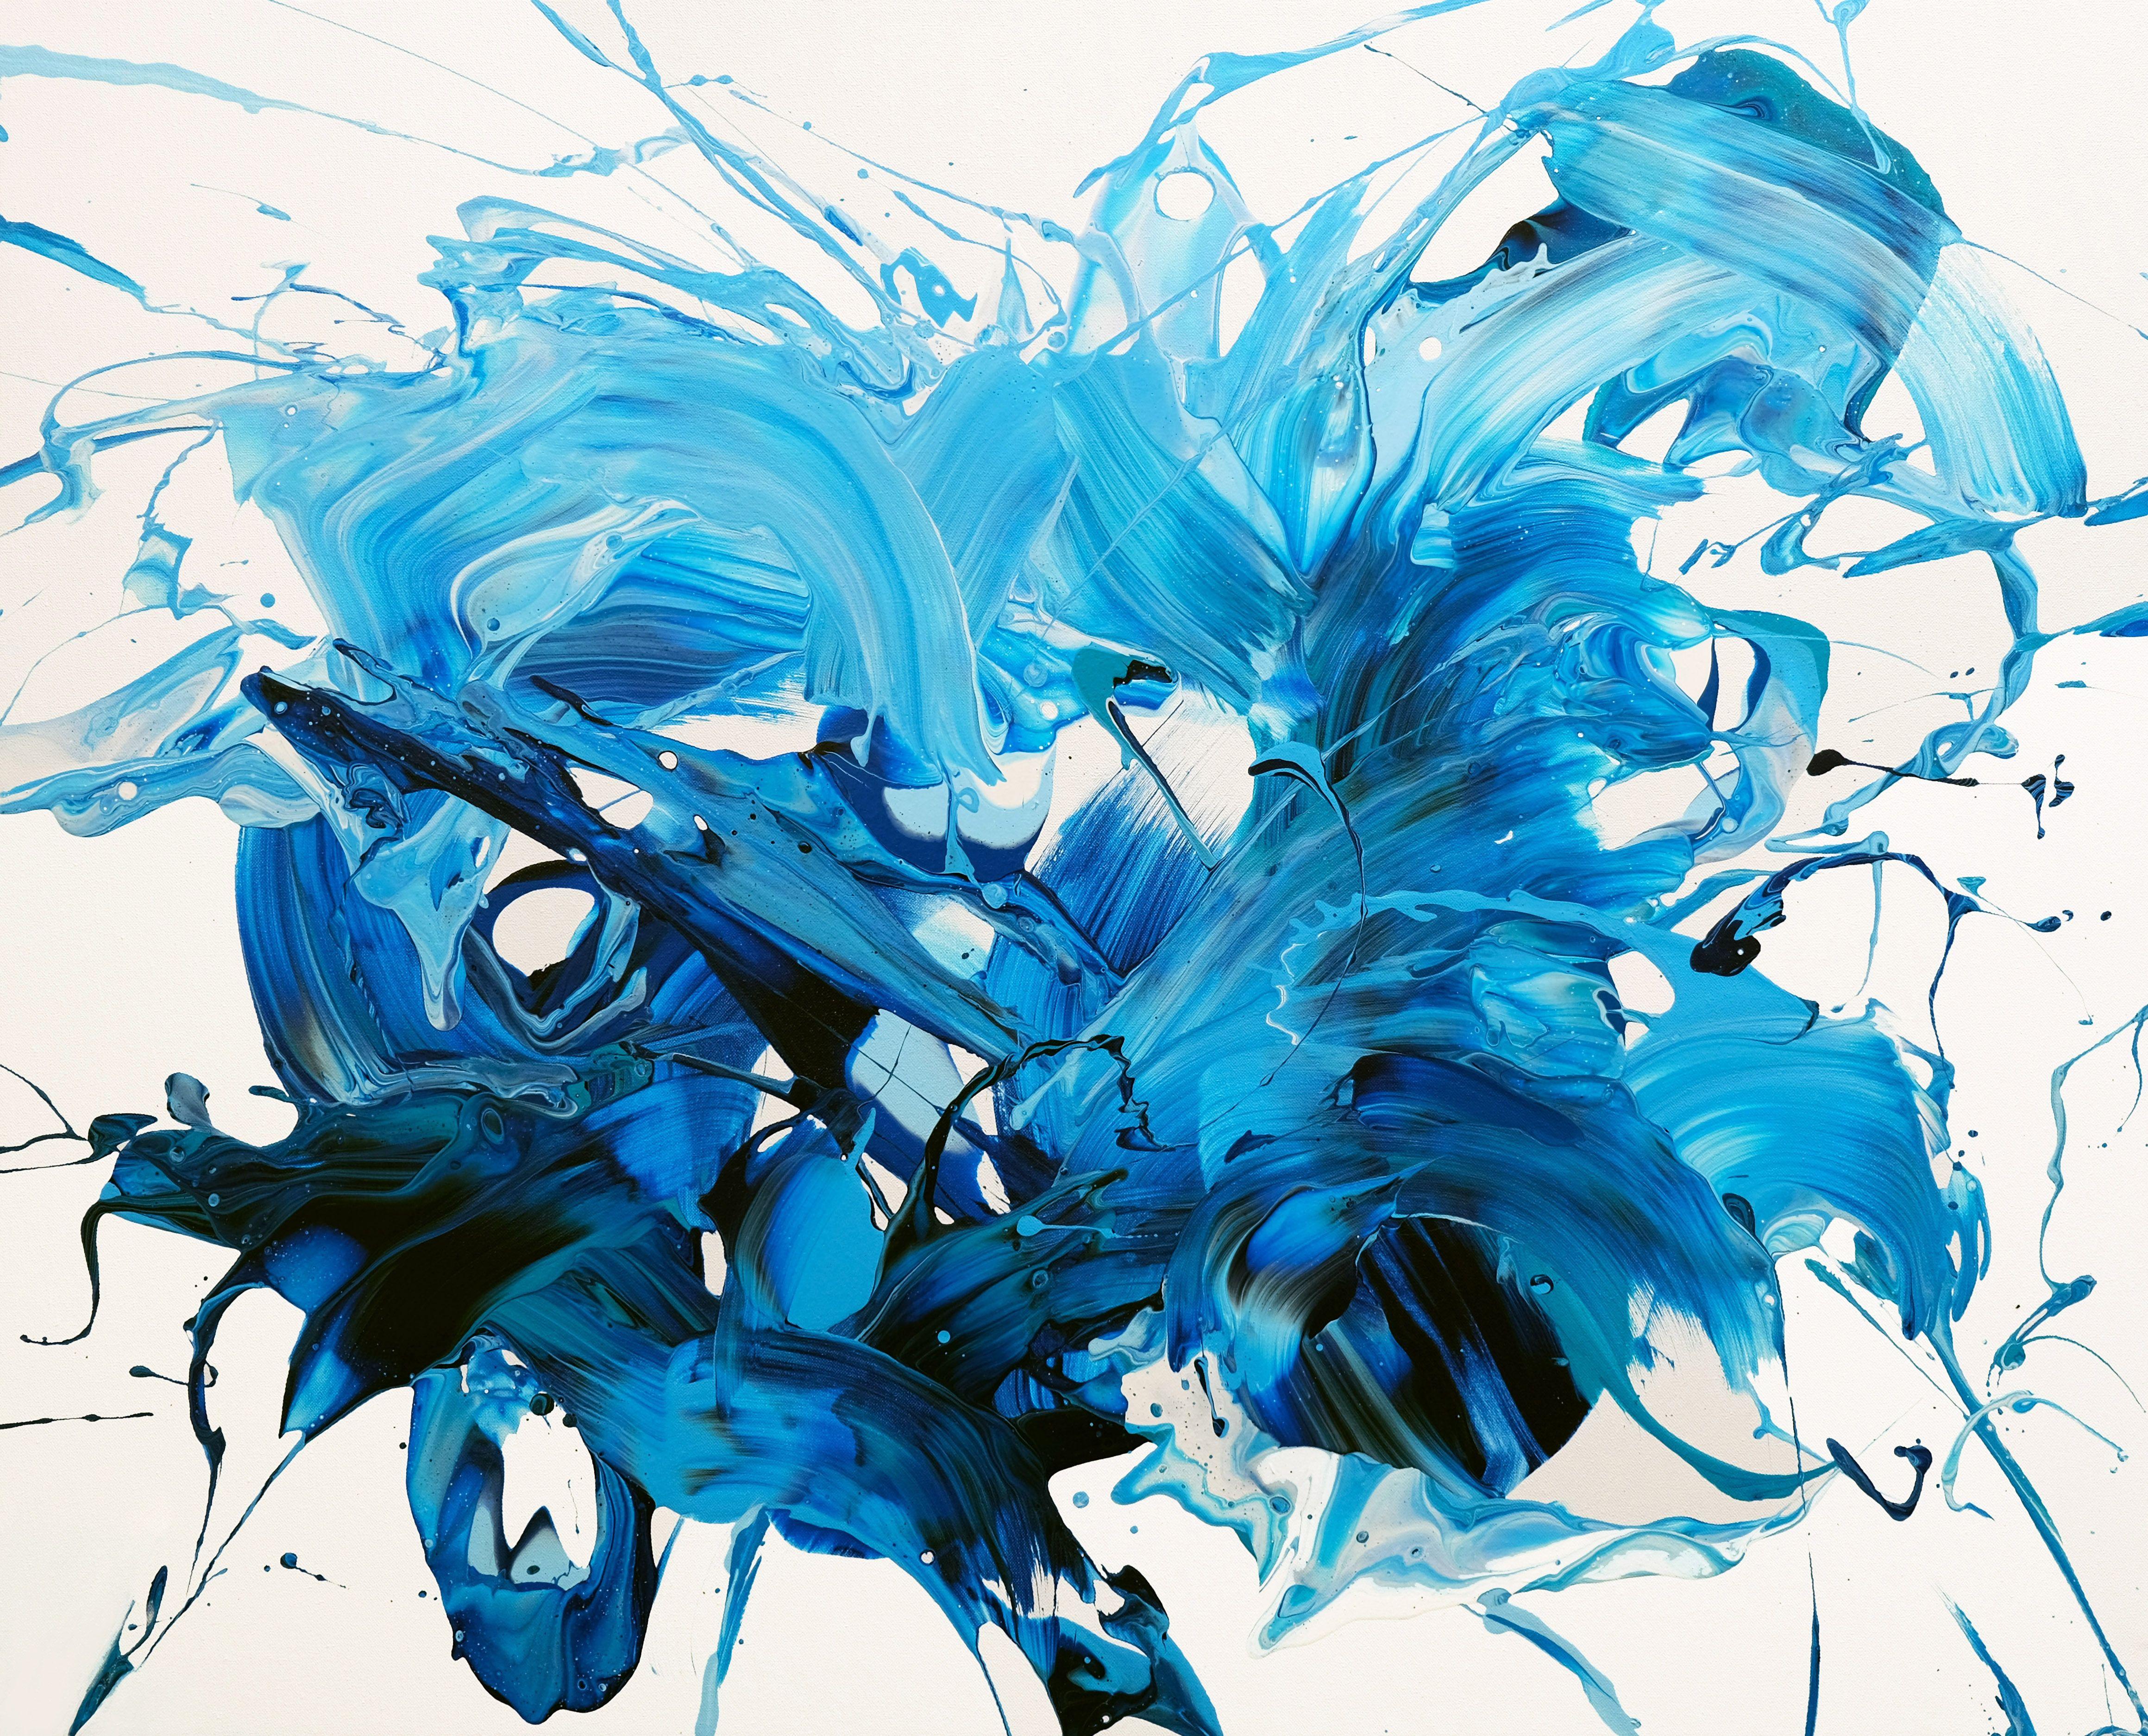 Behshad Arjomandi Abstract Painting - Blue Expressions III, Painting, Acrylic on Canvas